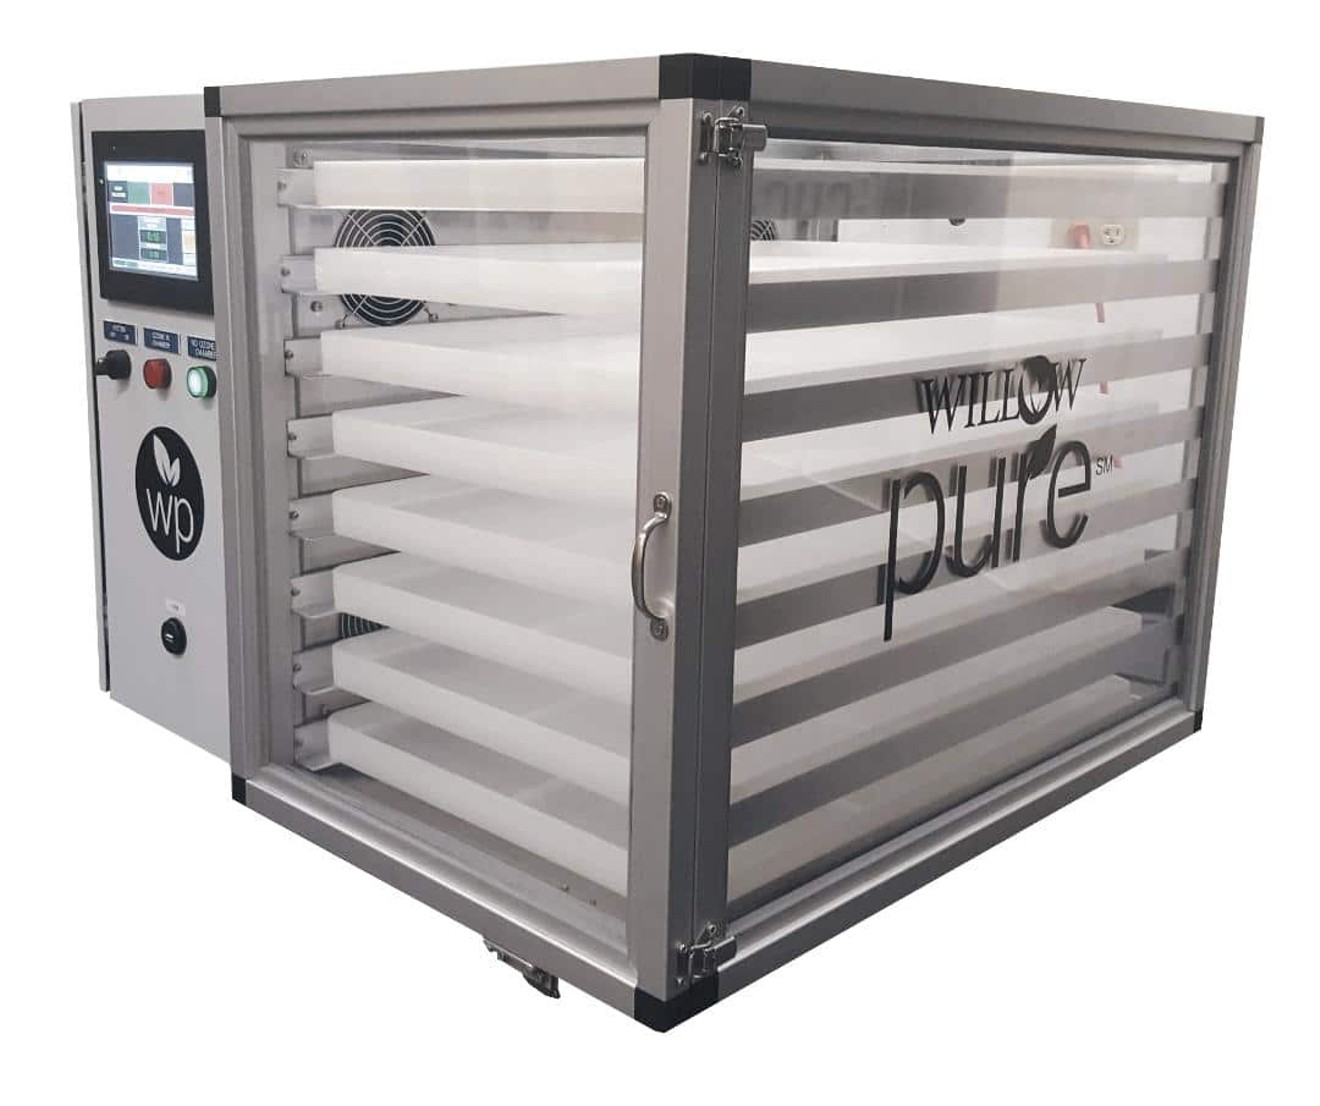 Willow Industries makes three different machines to clean moldy cannabis, depending on size.